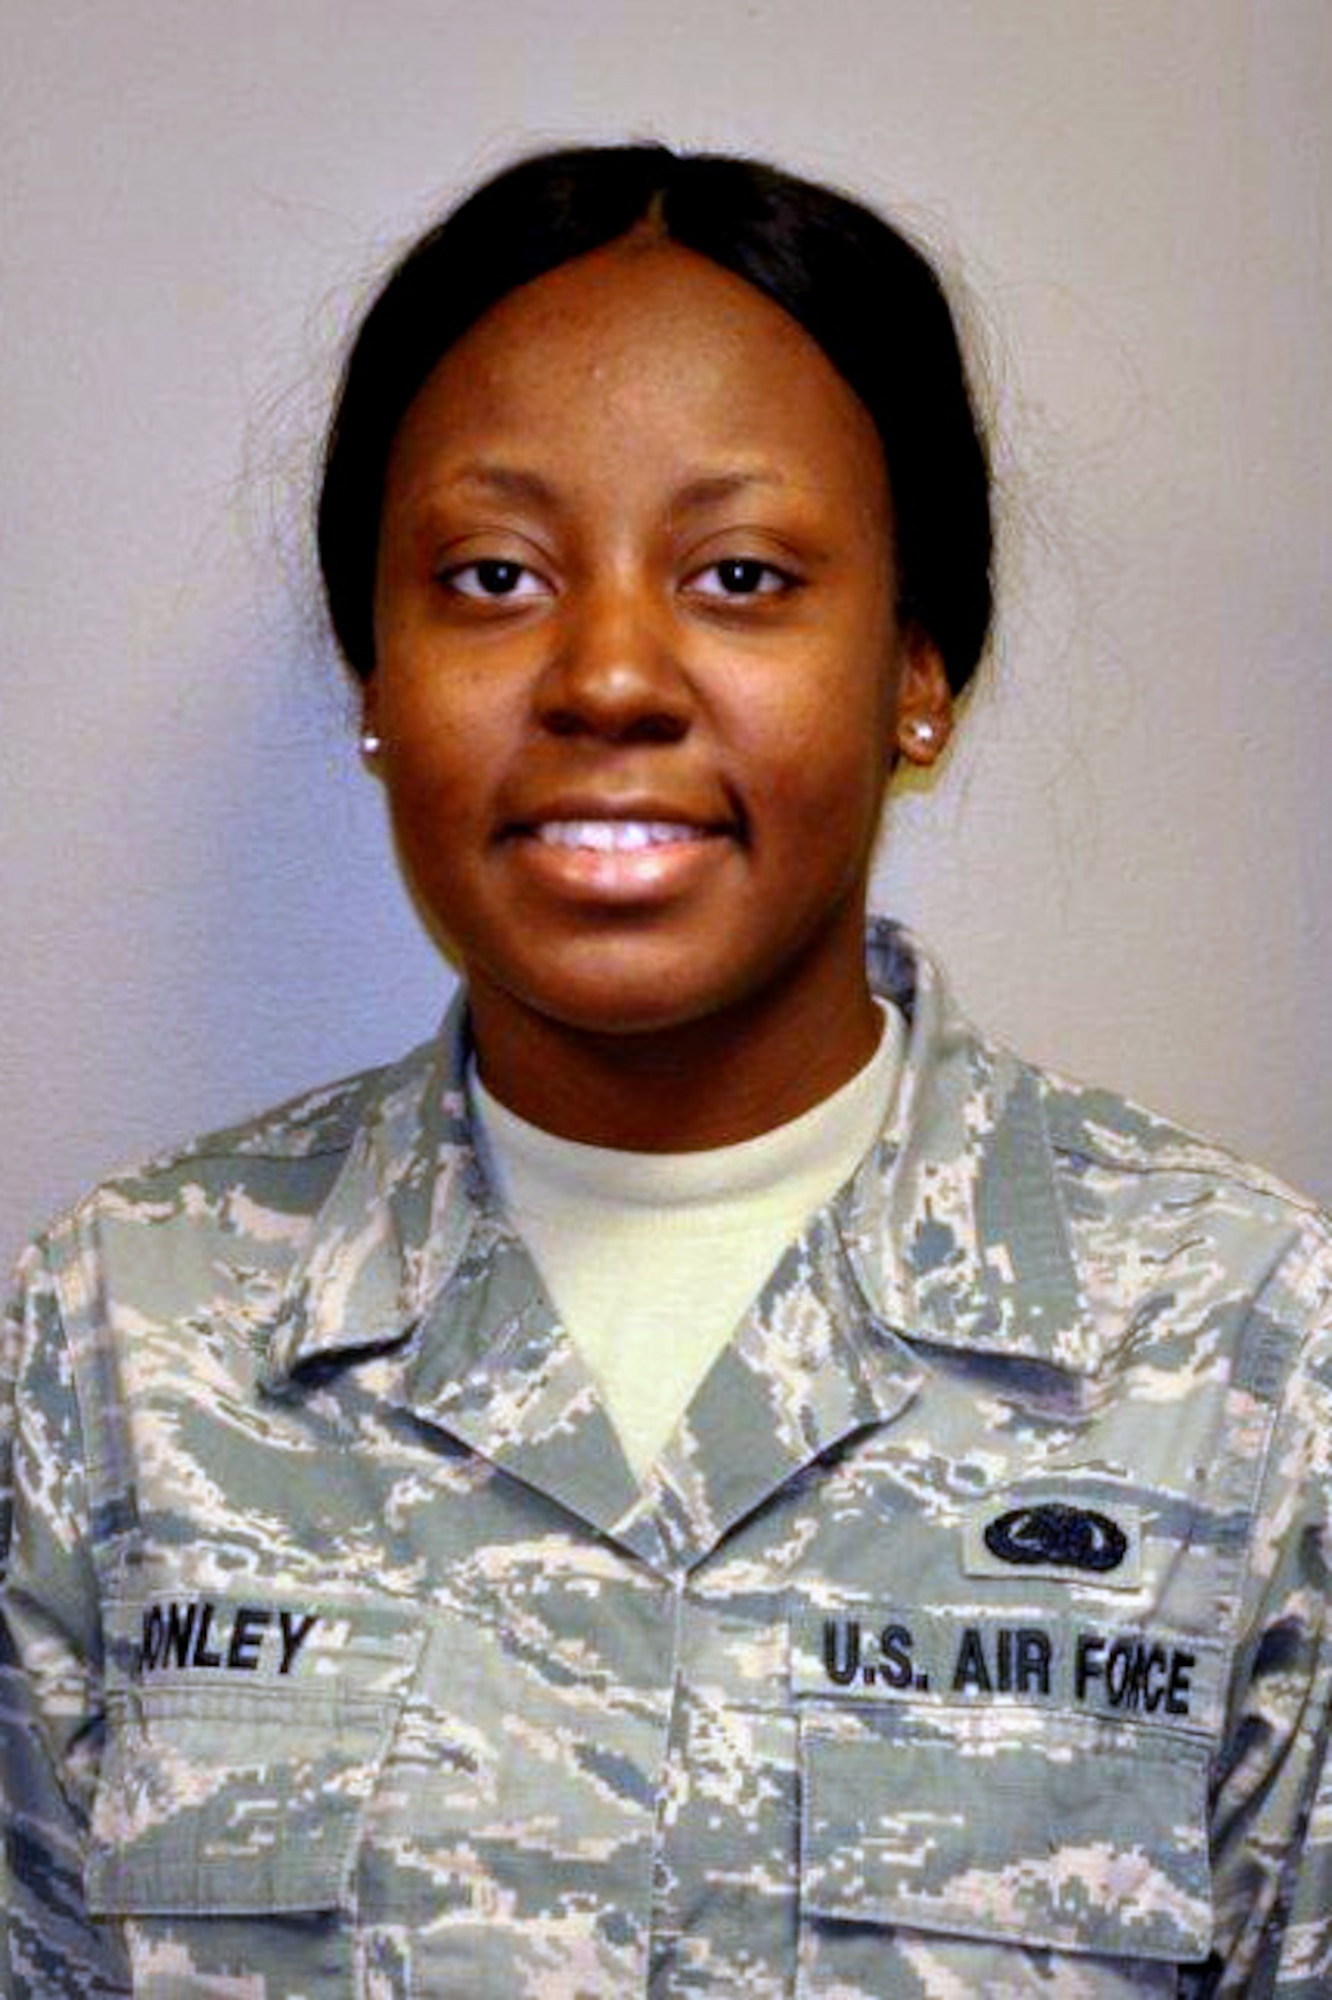 Senior Airman Natasha Donley, 476th Logistics Readiness Squadron, poses for a photo May 4, 2014 at Moody Air Force Base, Georgia. Donley was named Airman of the Quarter for the first quarter of 2014. (U.S. Air Force courtesy photo/Released)